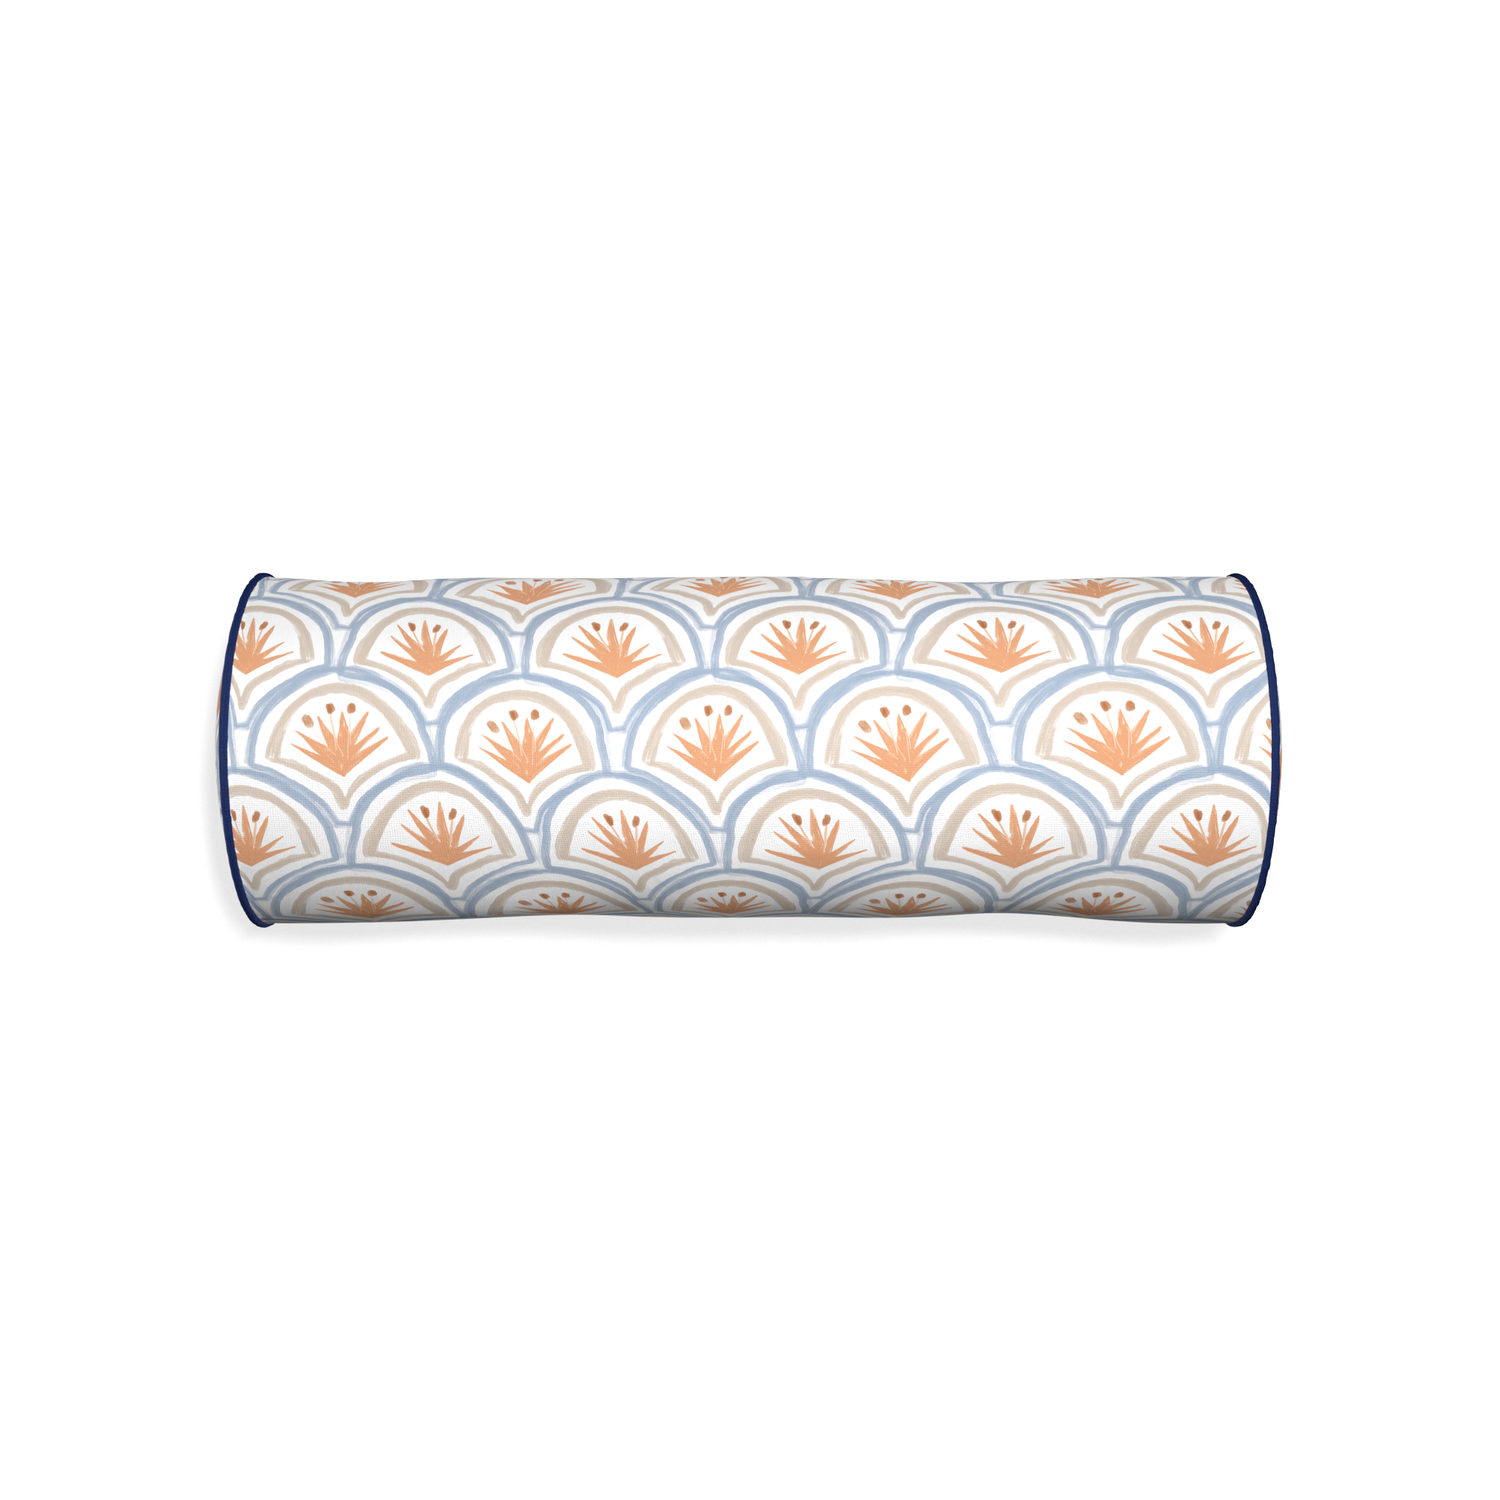 Bolster thatcher apricot custom art deco palm patternpillow with midnight piping on white background